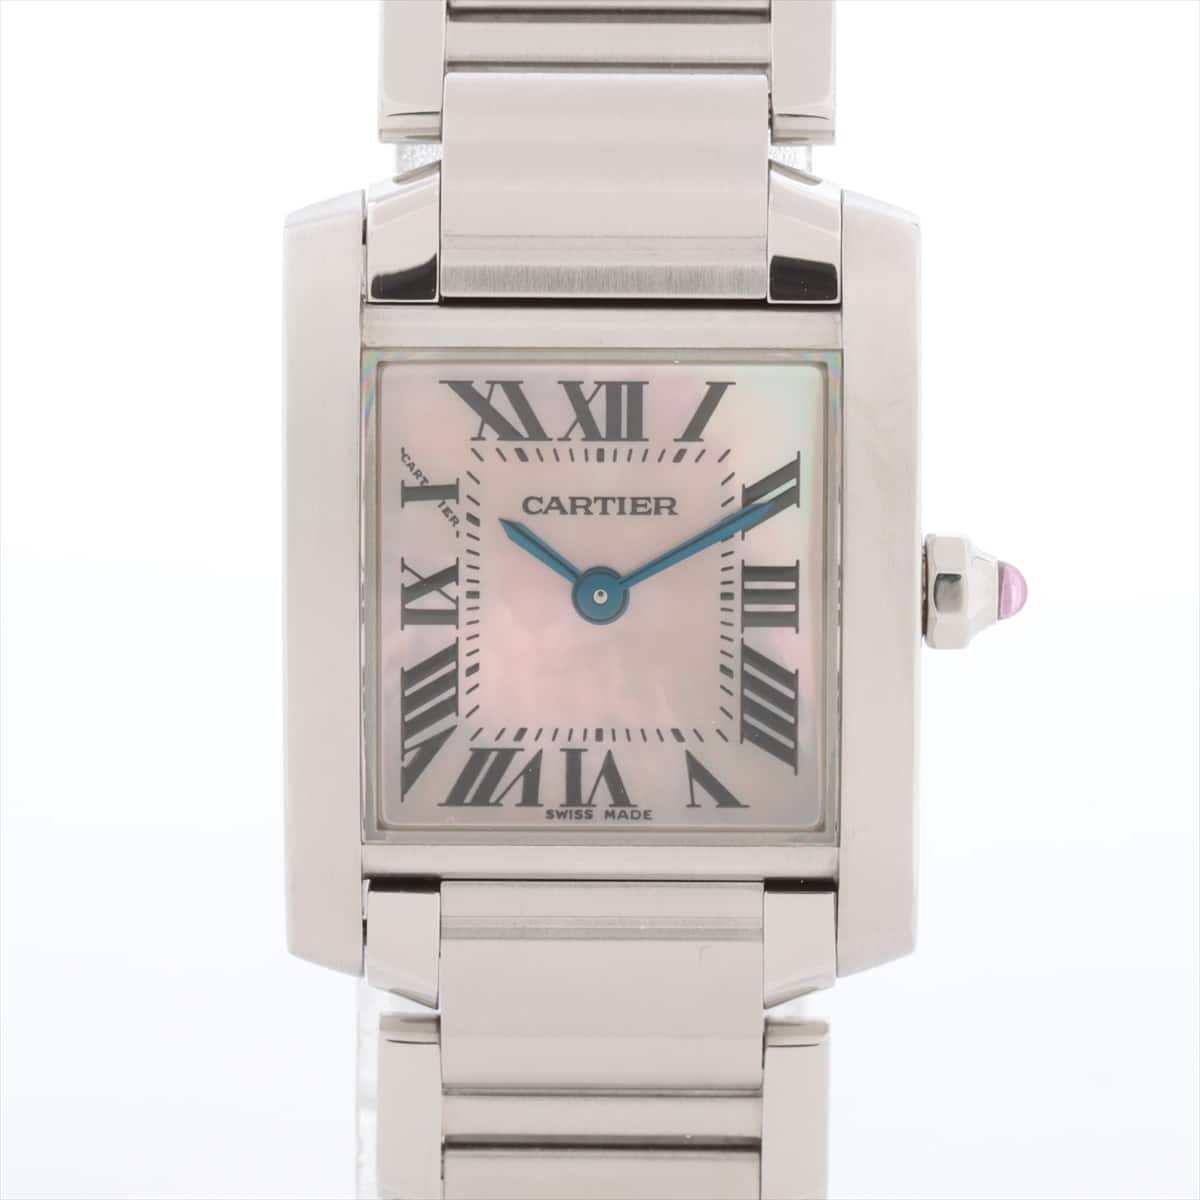 [Chrono] Cartier Tank Francaise SM W51028Q3 SS QZ Pink MOP dial Extra Link 1 Shell scratches